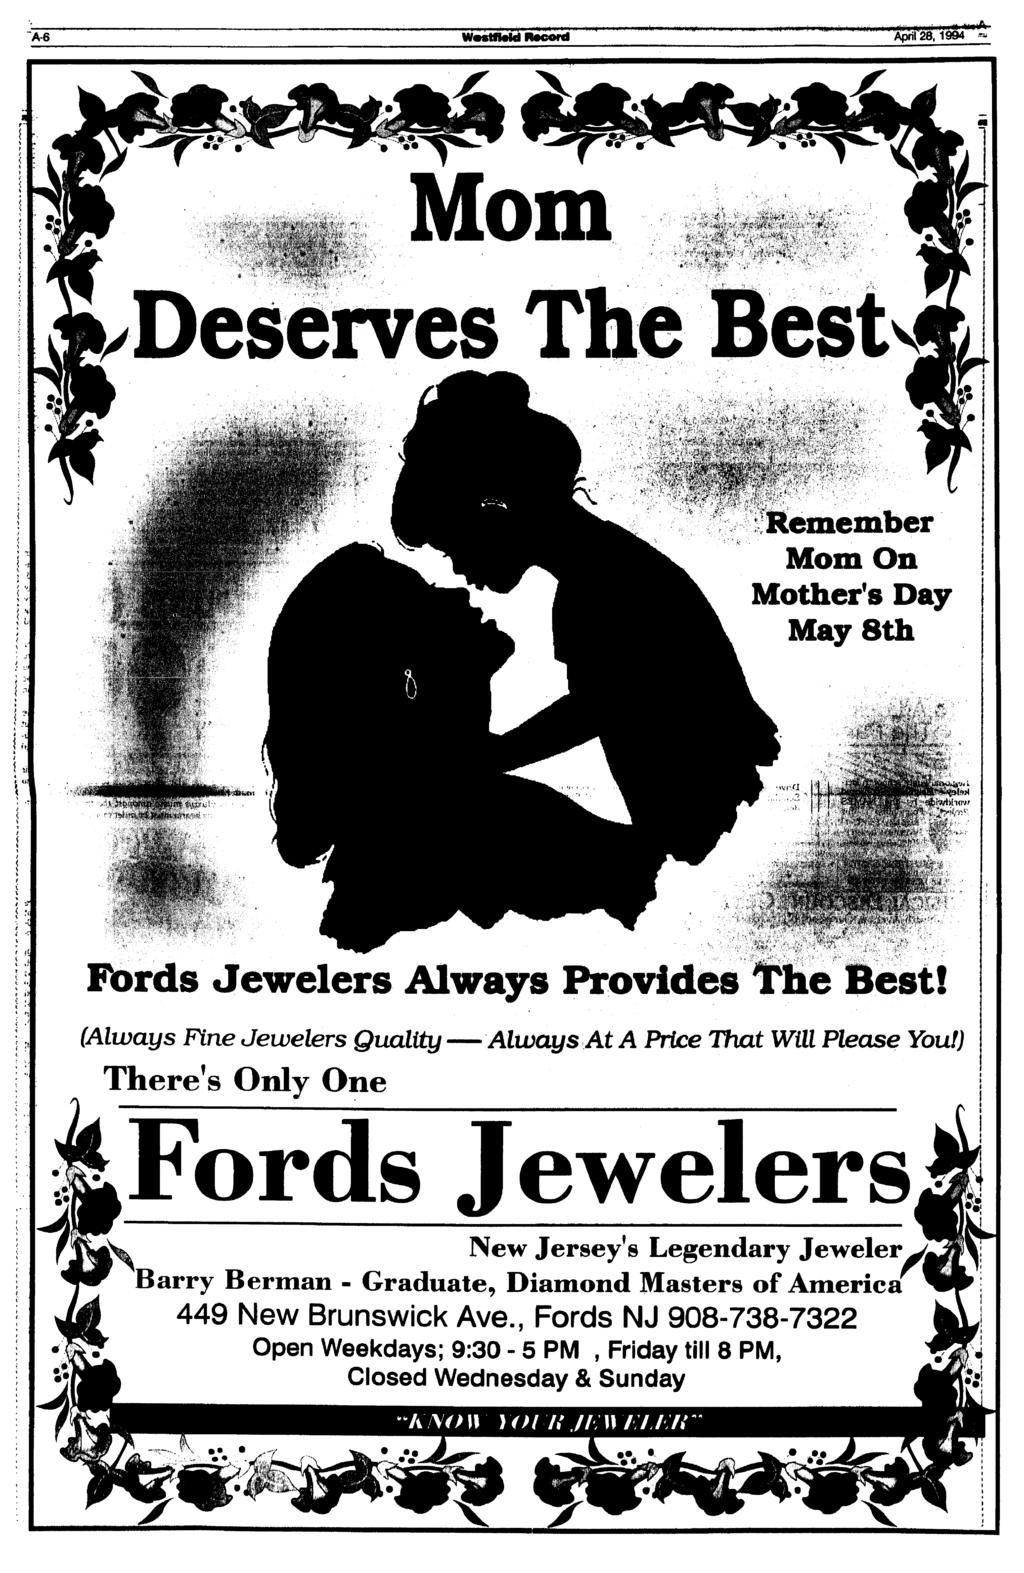 W«stfMd Record,1994 «. ^'W r it Mom Deserves The Best, *.<*. atinber Mom On Mother's Day May 8th. fl?'ik" ««fl'bli'v, -'I \ Fords Jewelers Always Provides The Best!